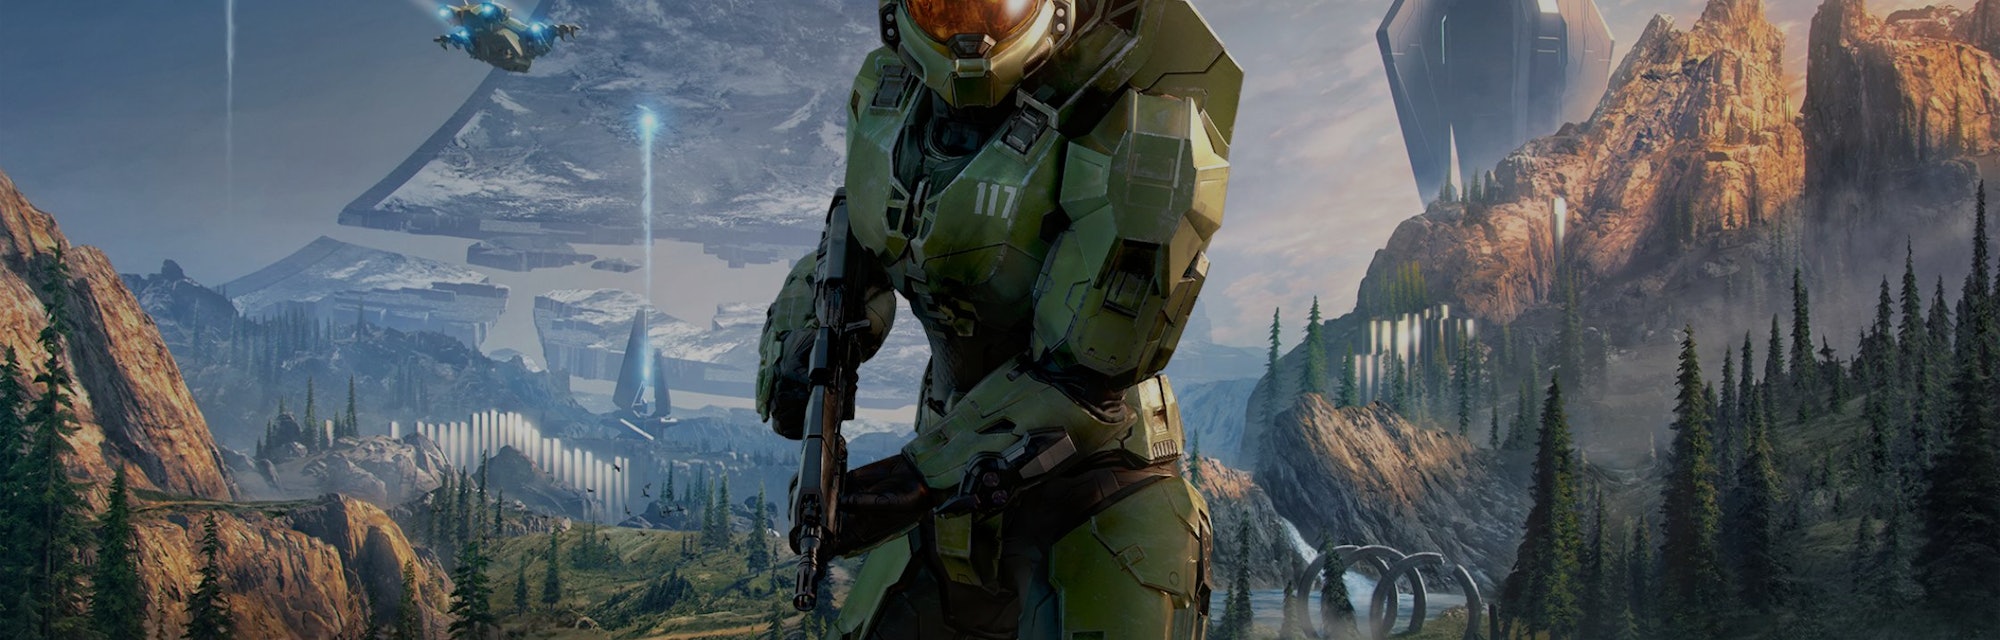 Promotional image for Halo Infinite 